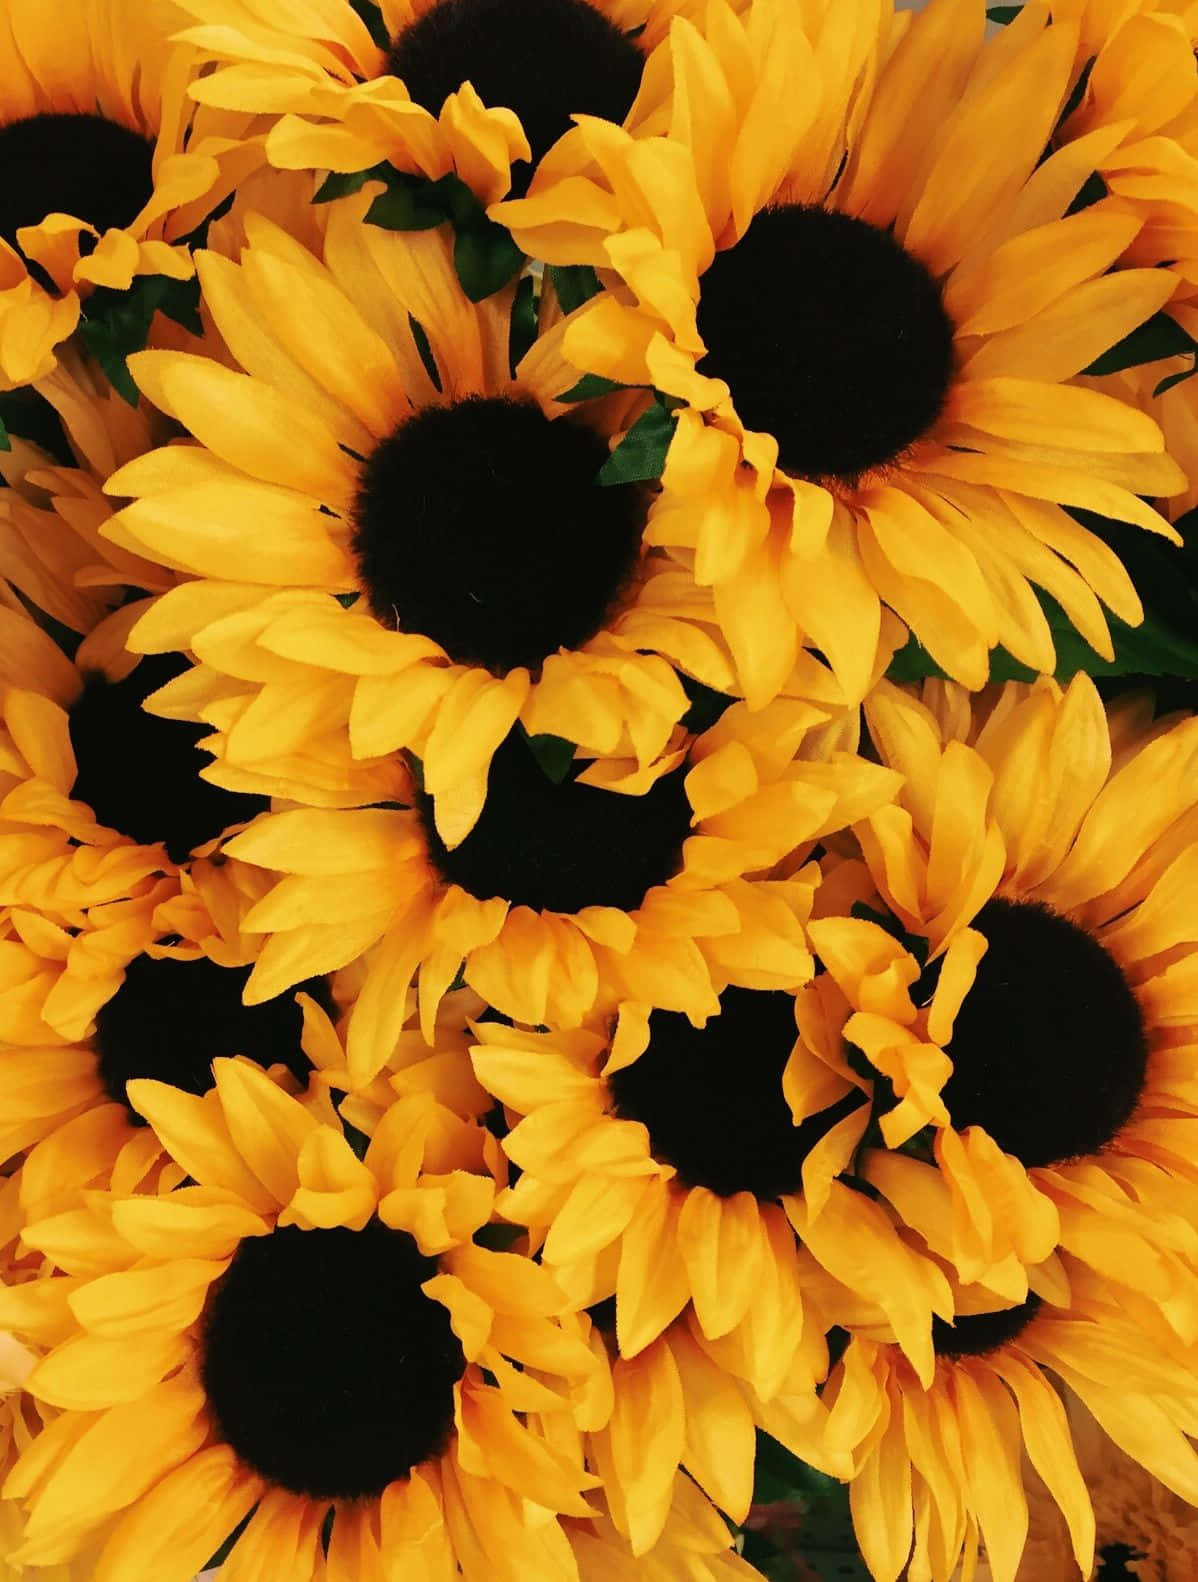 A bright yellow sunflower with a soft, bright aesthetic Wallpaper